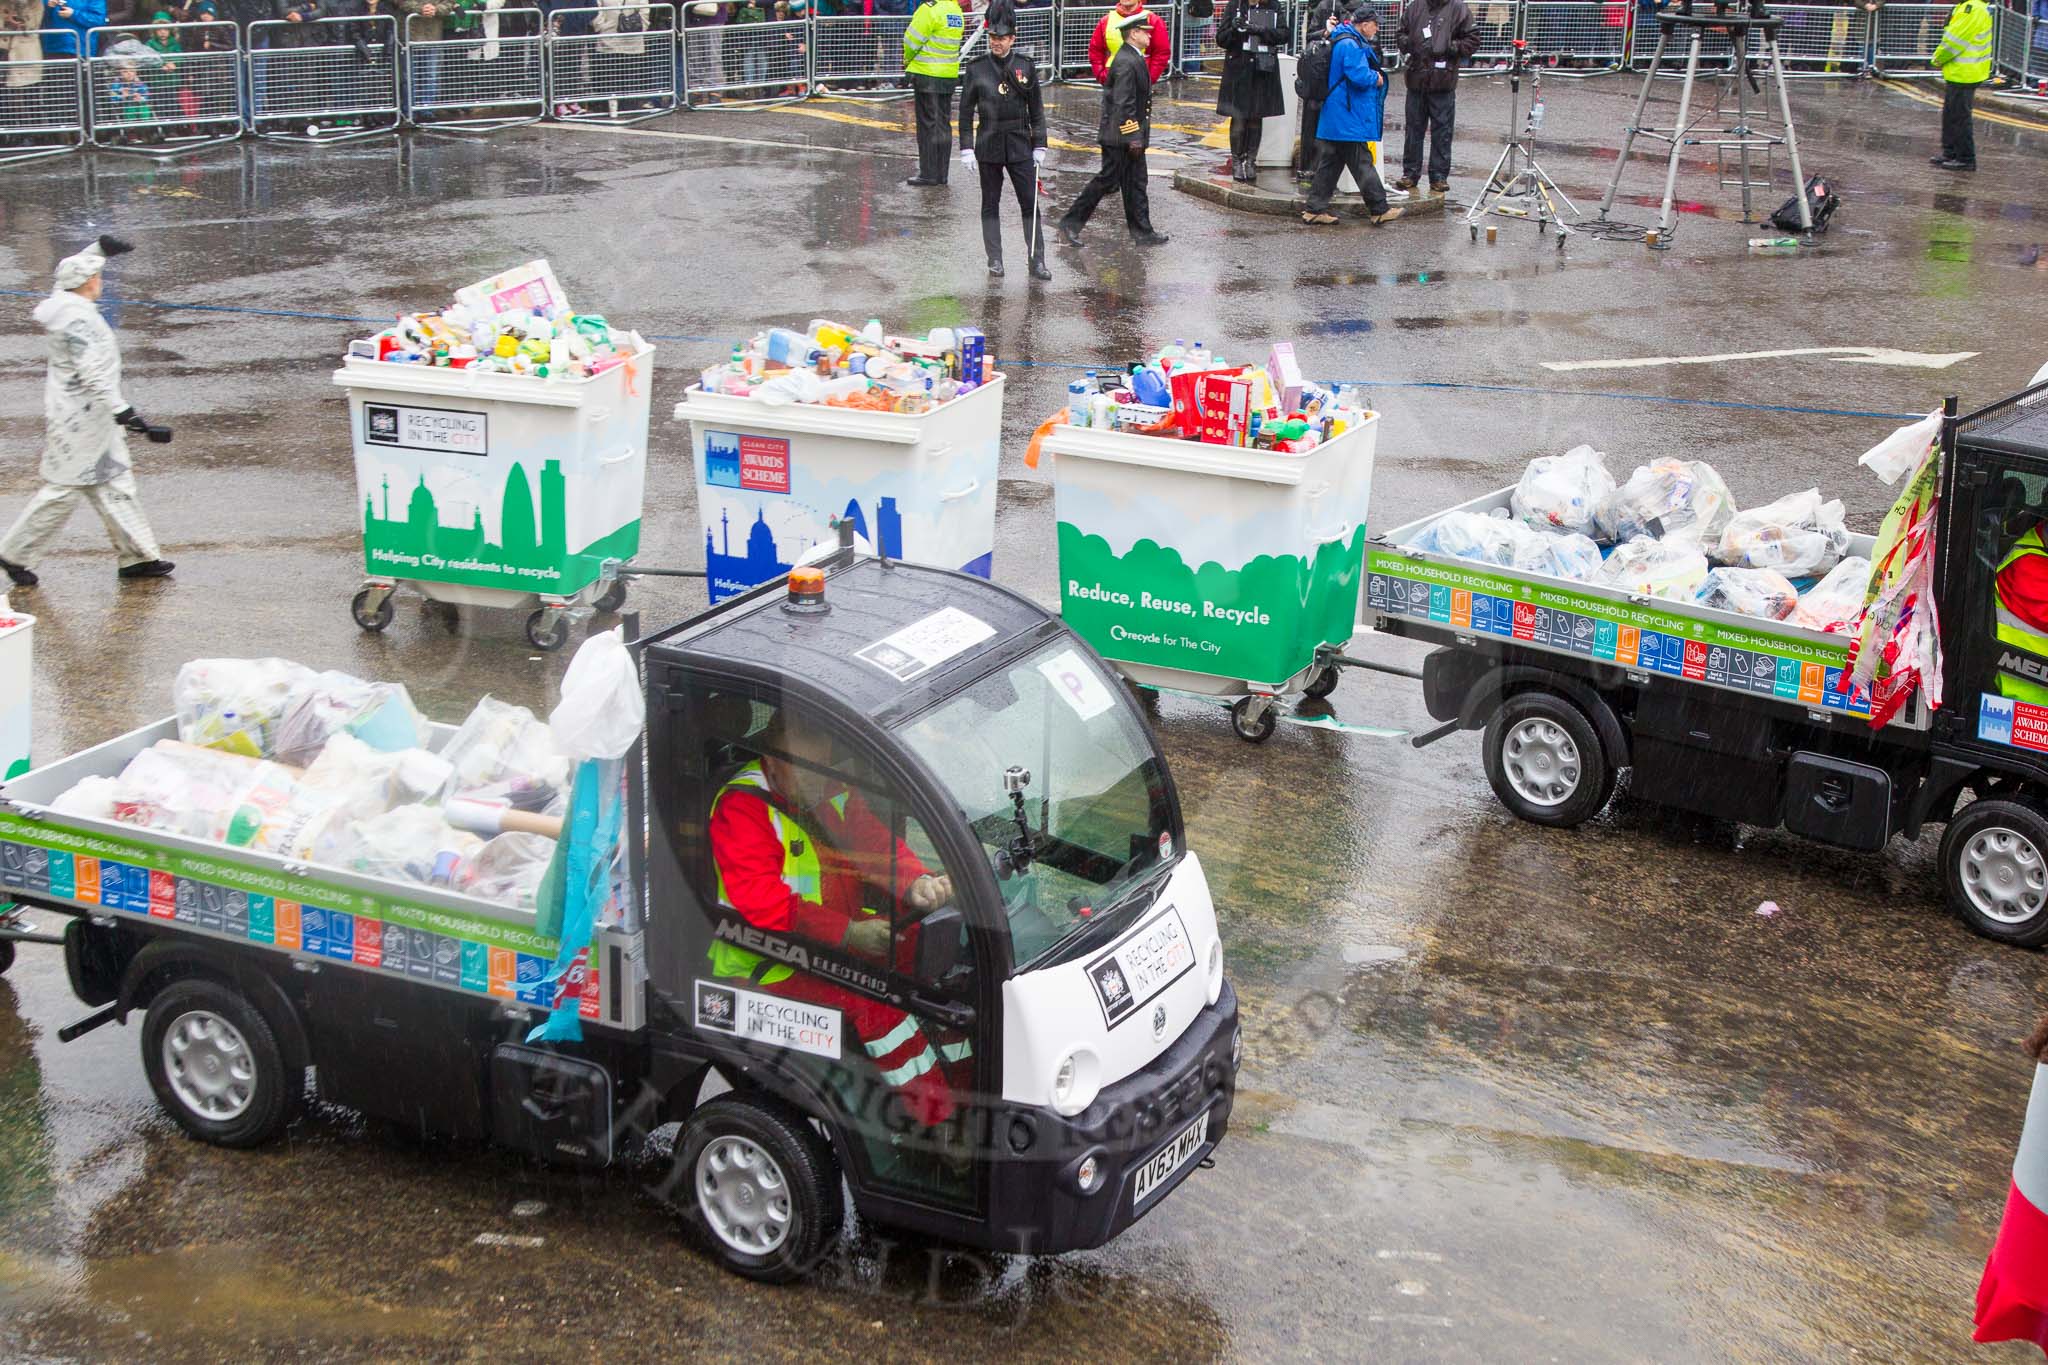 Lord Mayor's Show 2013: 59-Recycling in the City- The Binbot is joined again by his drumming street sweepers to celebrate 20th anniversary of the City's unique Clean City Awards scheme..
Press stand opposite Mansion House, City of London,
London,
Greater London,
United Kingdom,
on 09 November 2013 at 11:32, image #751